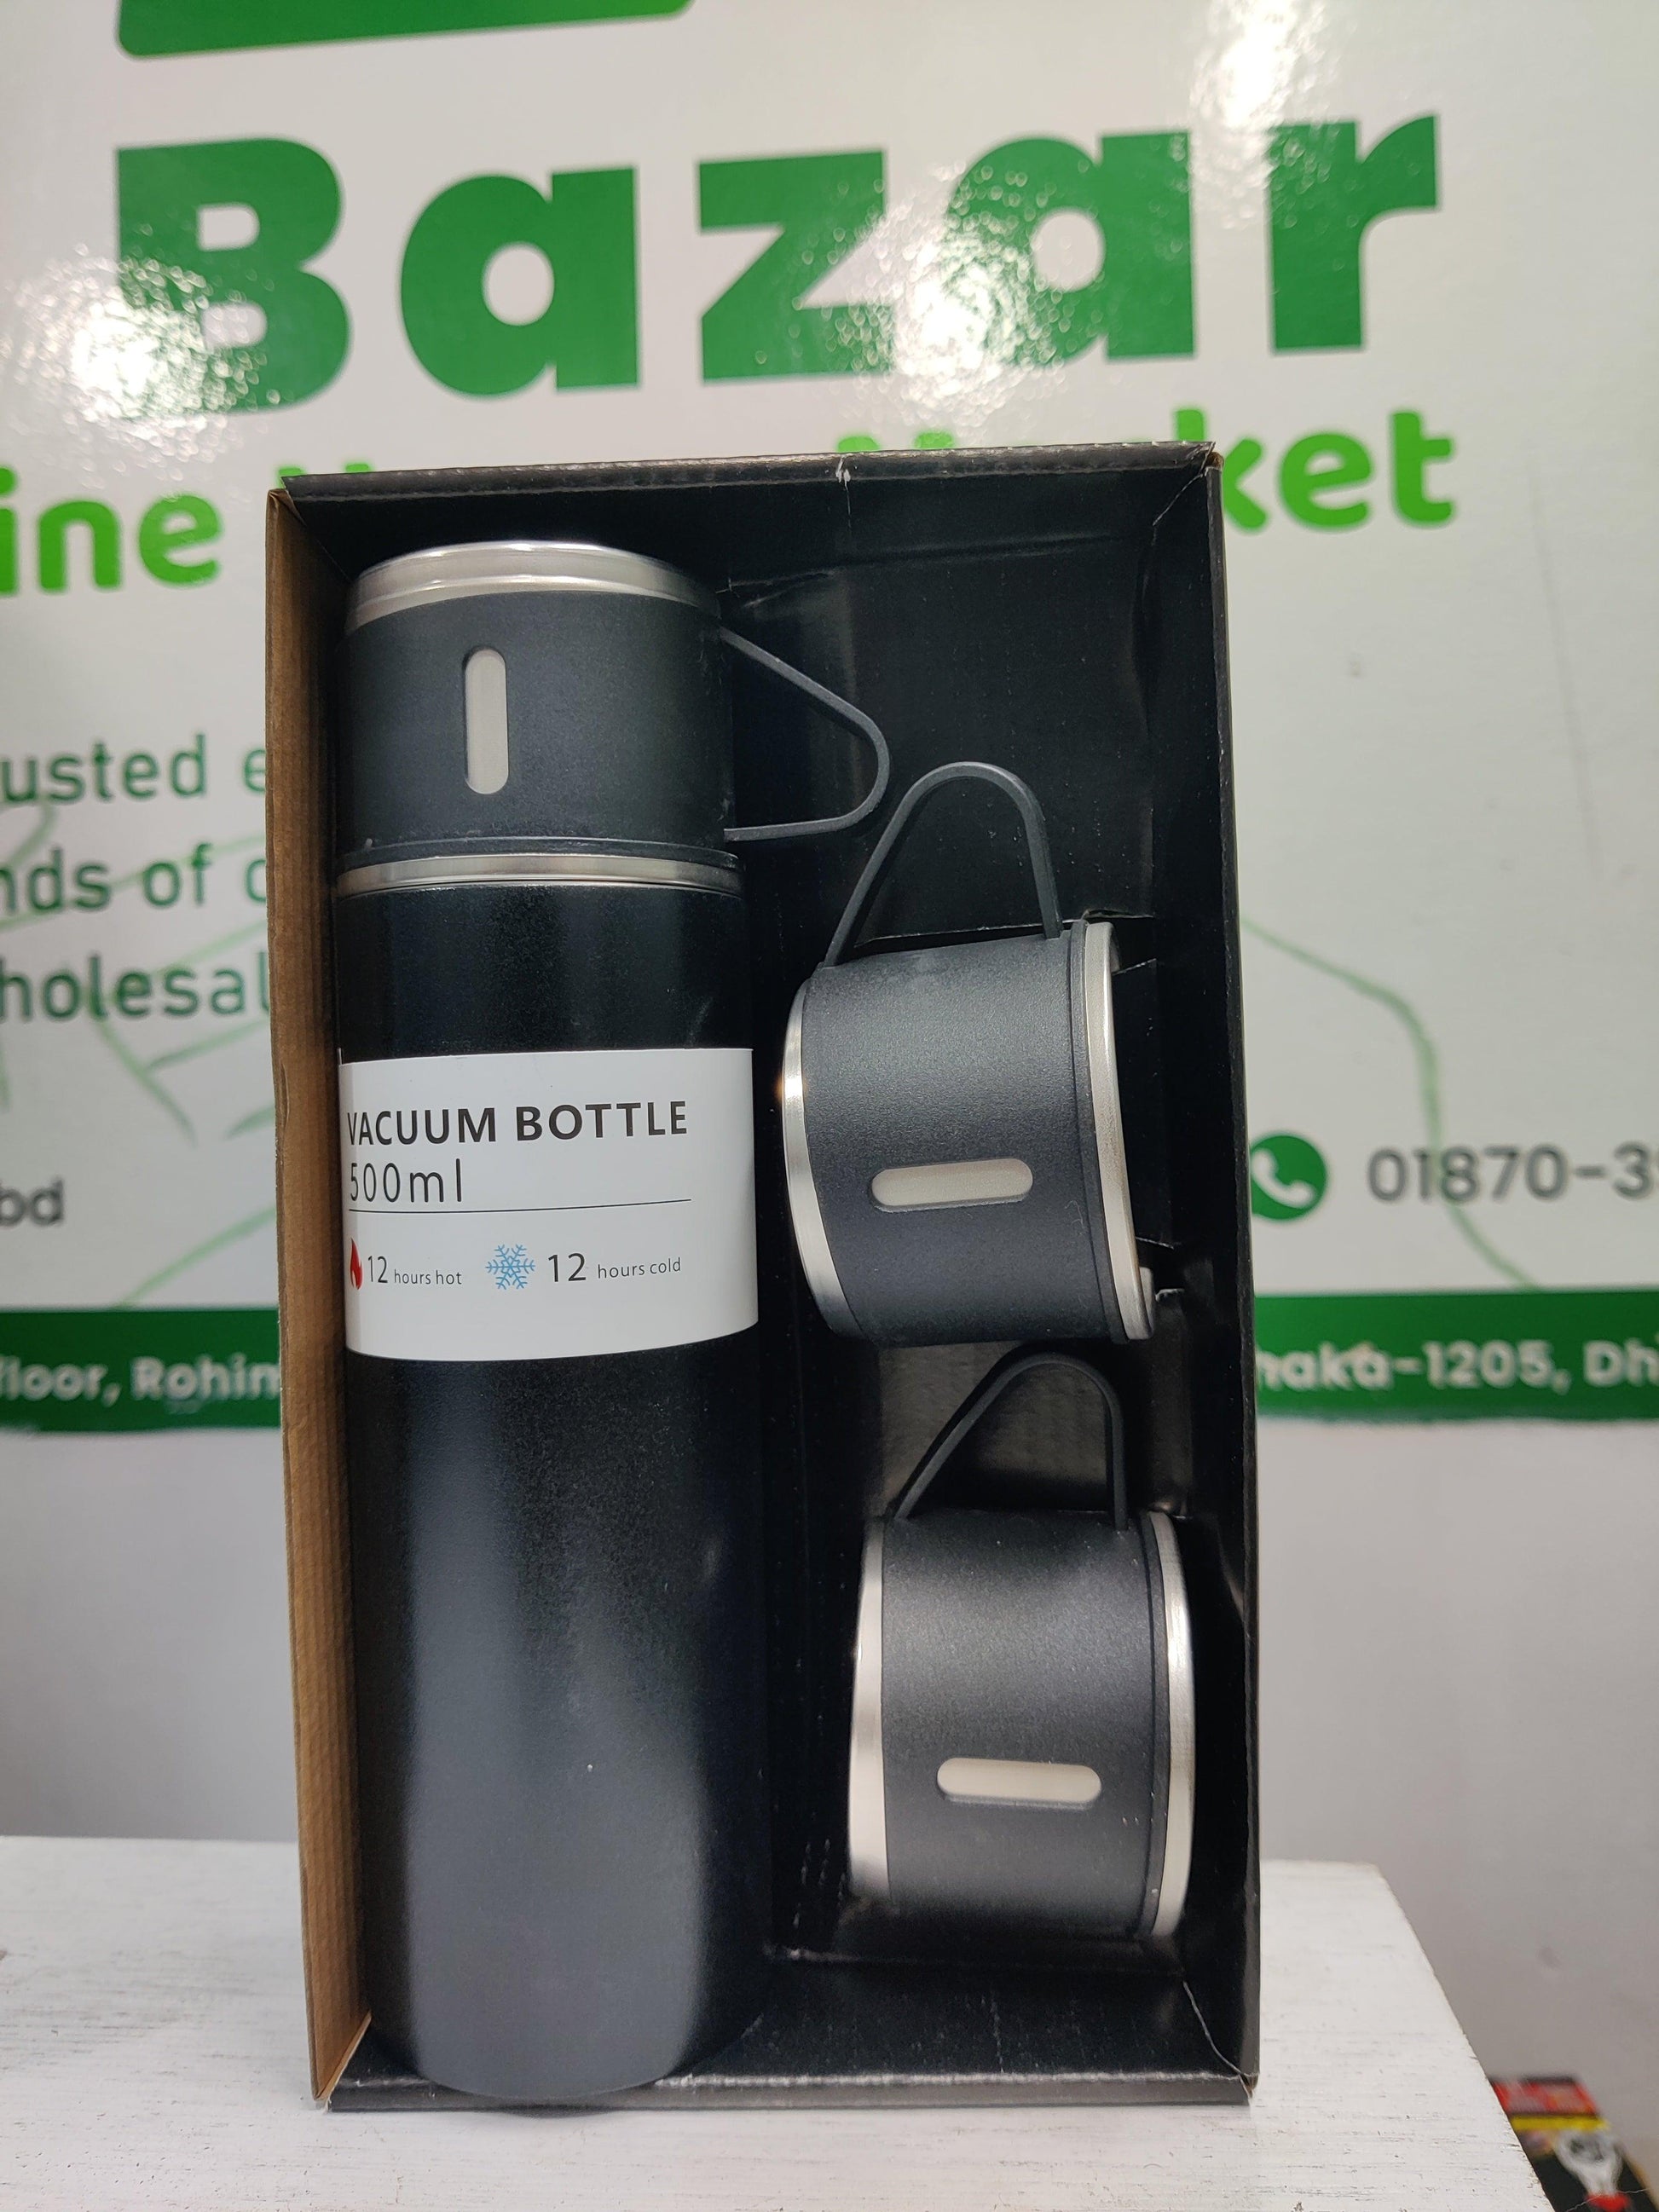 Stainless Steel Vacuum Flask Set 3 Cup (১ সেট ) - HT Bazar